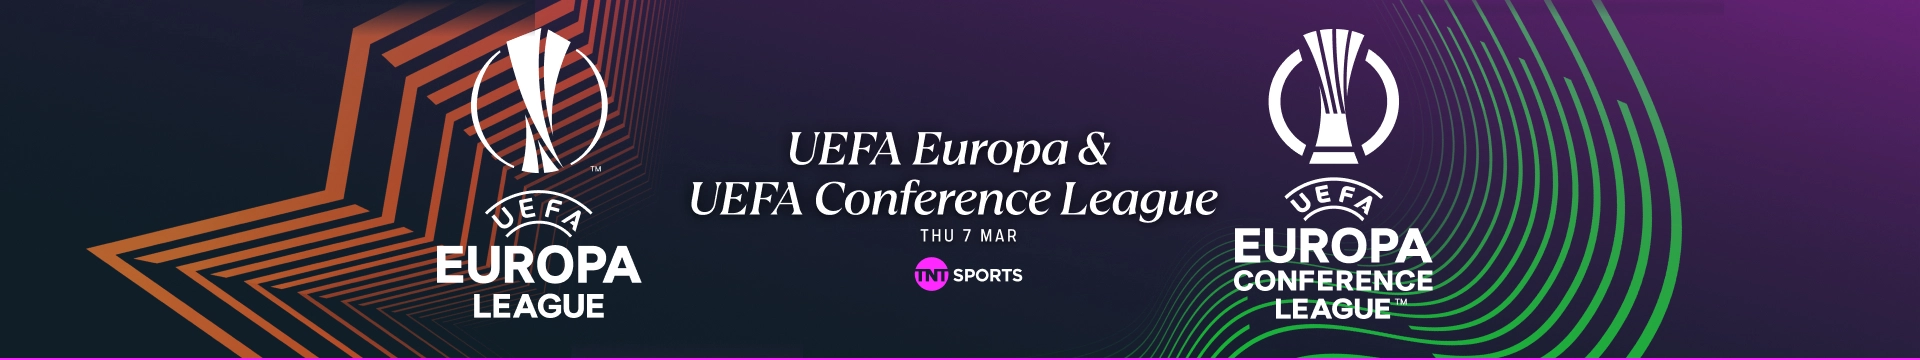 UEFA Europa and UEFA Conference League - Thursday 7 March on TNT Sports